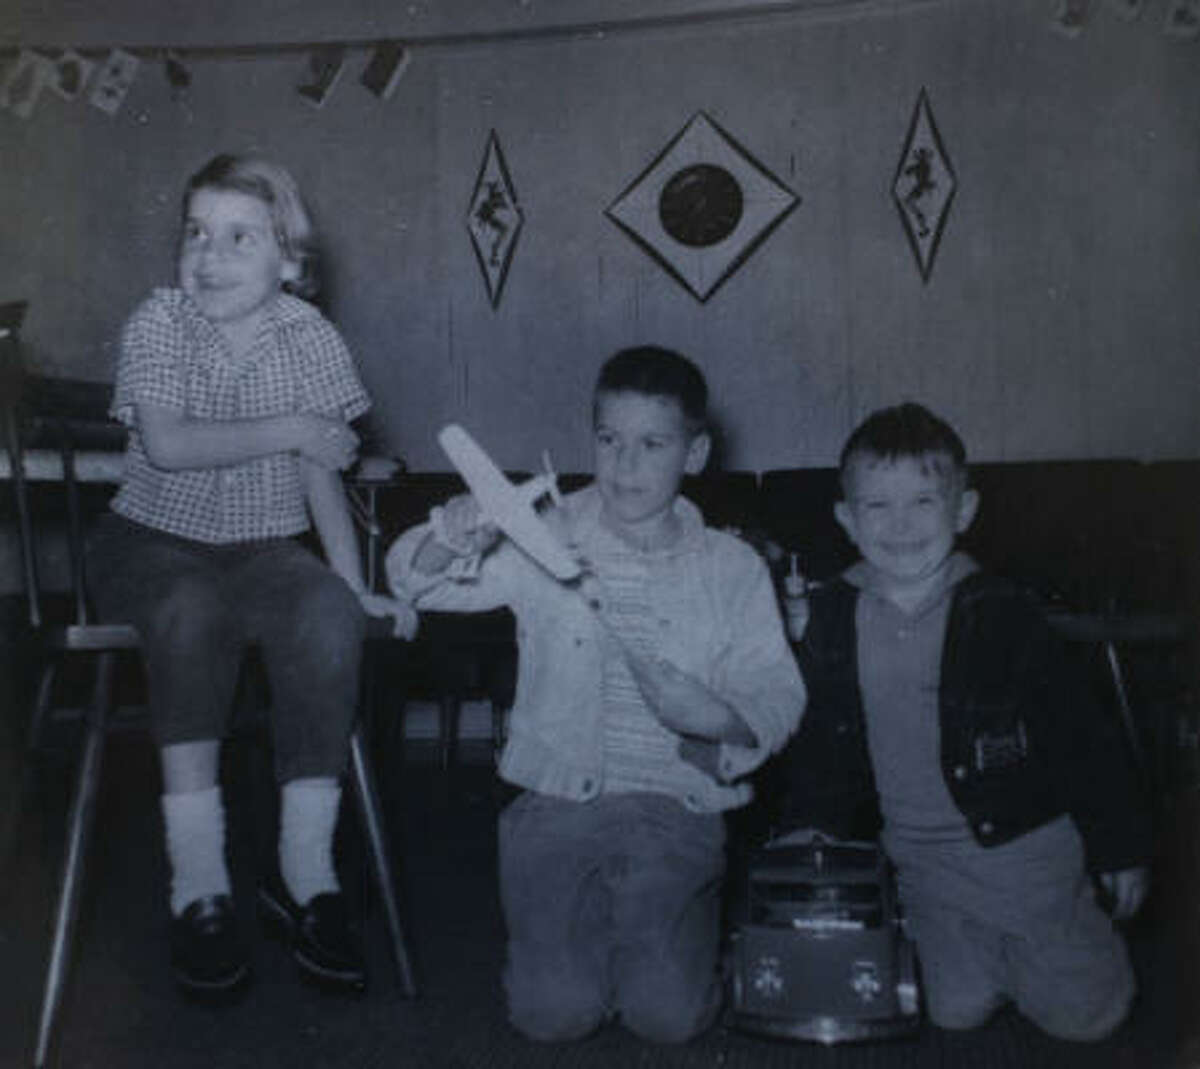 An undated family photo shows Randell Harvey, center, with sister Lenore McNiel, left, and cousin Terry Minter.